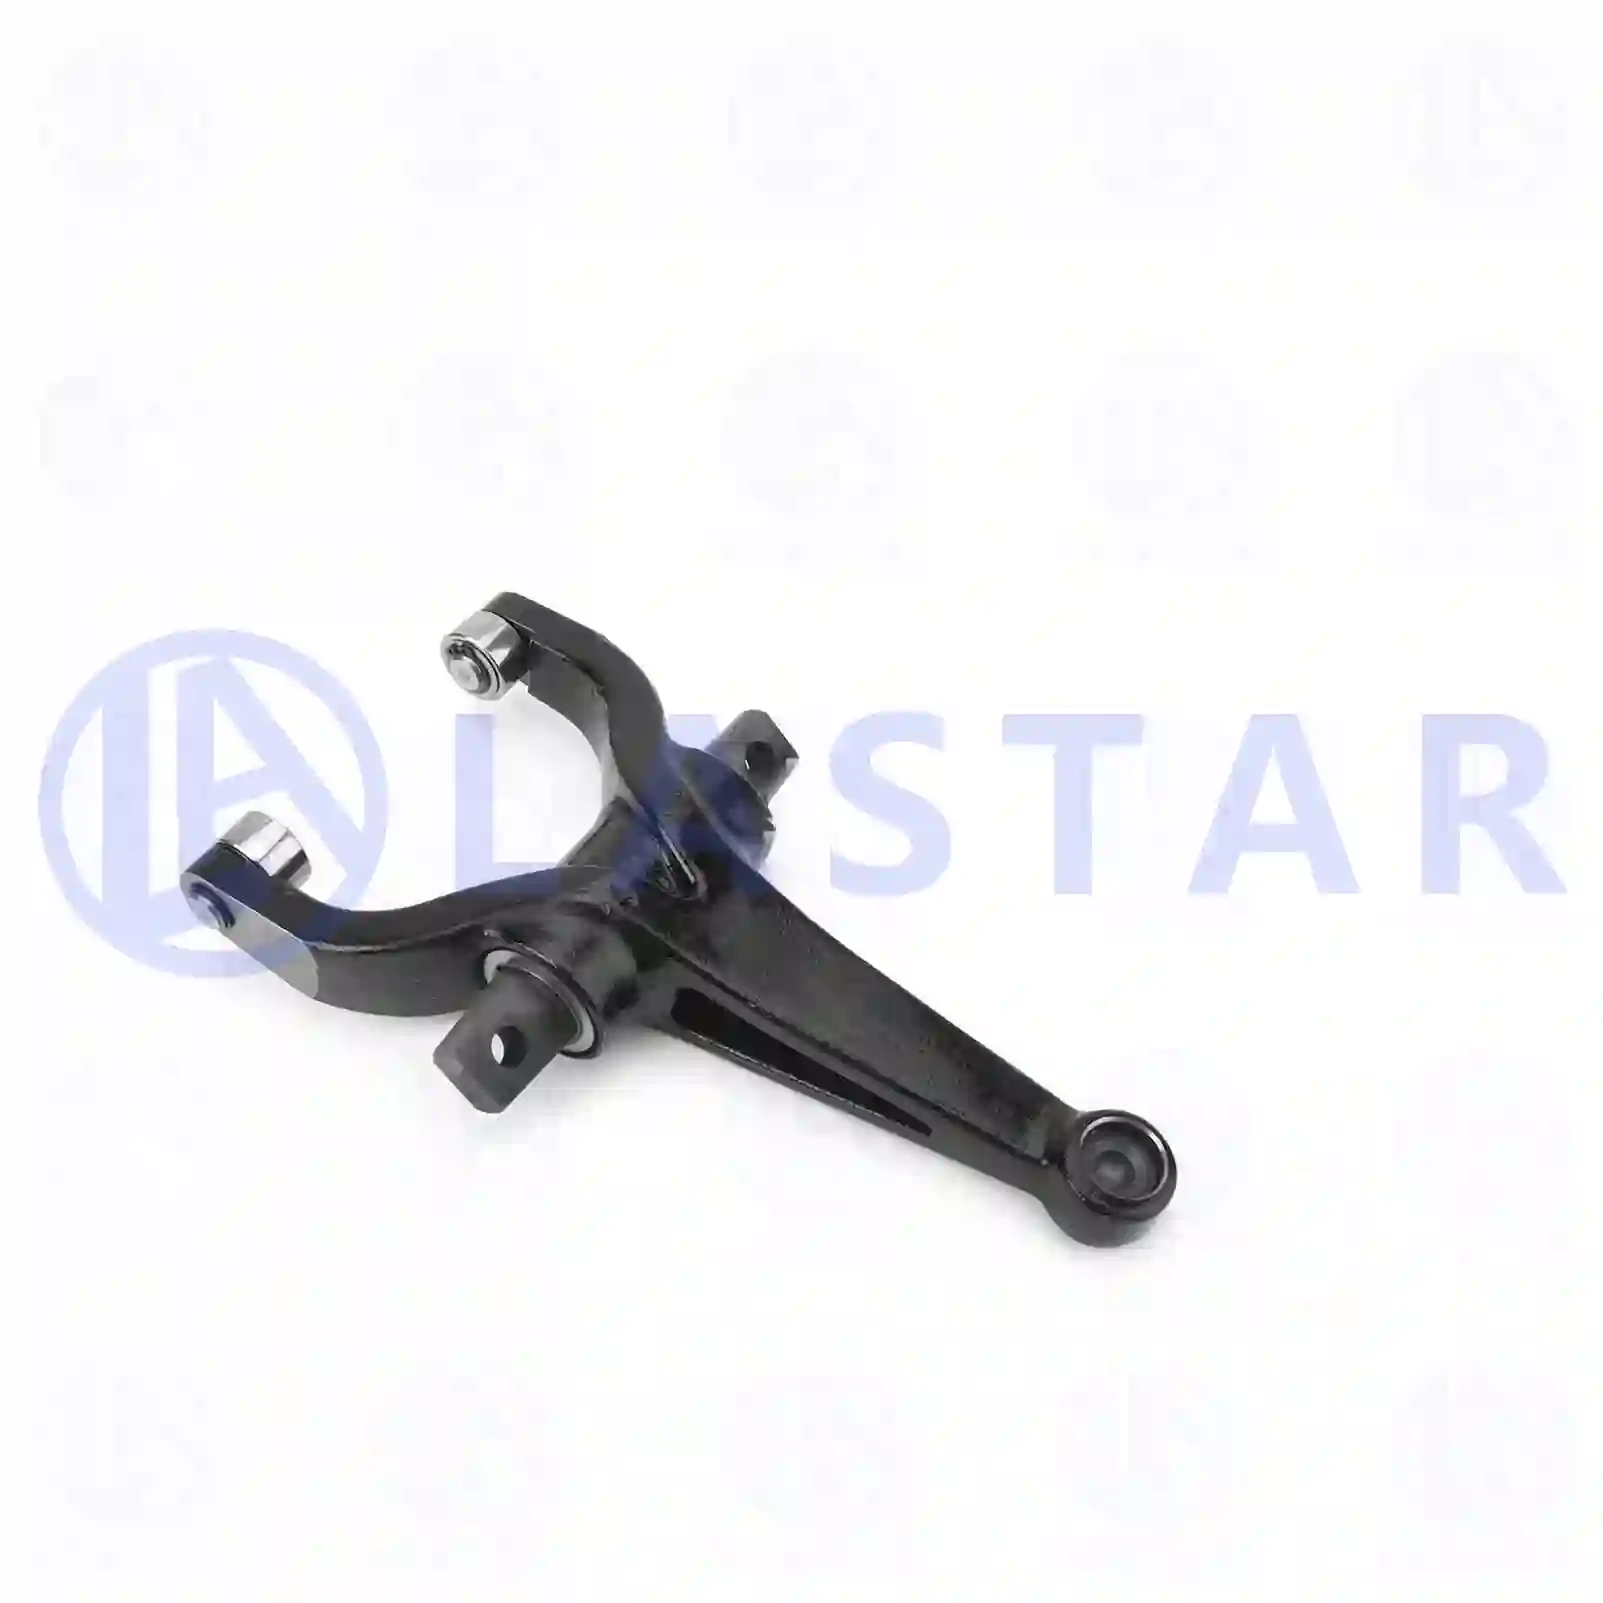 Release fork, 77723126, 1479577, 1543645, 1545625, 1737306, ZG30354-0008 ||  77723126 Lastar Spare Part | Truck Spare Parts, Auotomotive Spare Parts Release fork, 77723126, 1479577, 1543645, 1545625, 1737306, ZG30354-0008 ||  77723126 Lastar Spare Part | Truck Spare Parts, Auotomotive Spare Parts